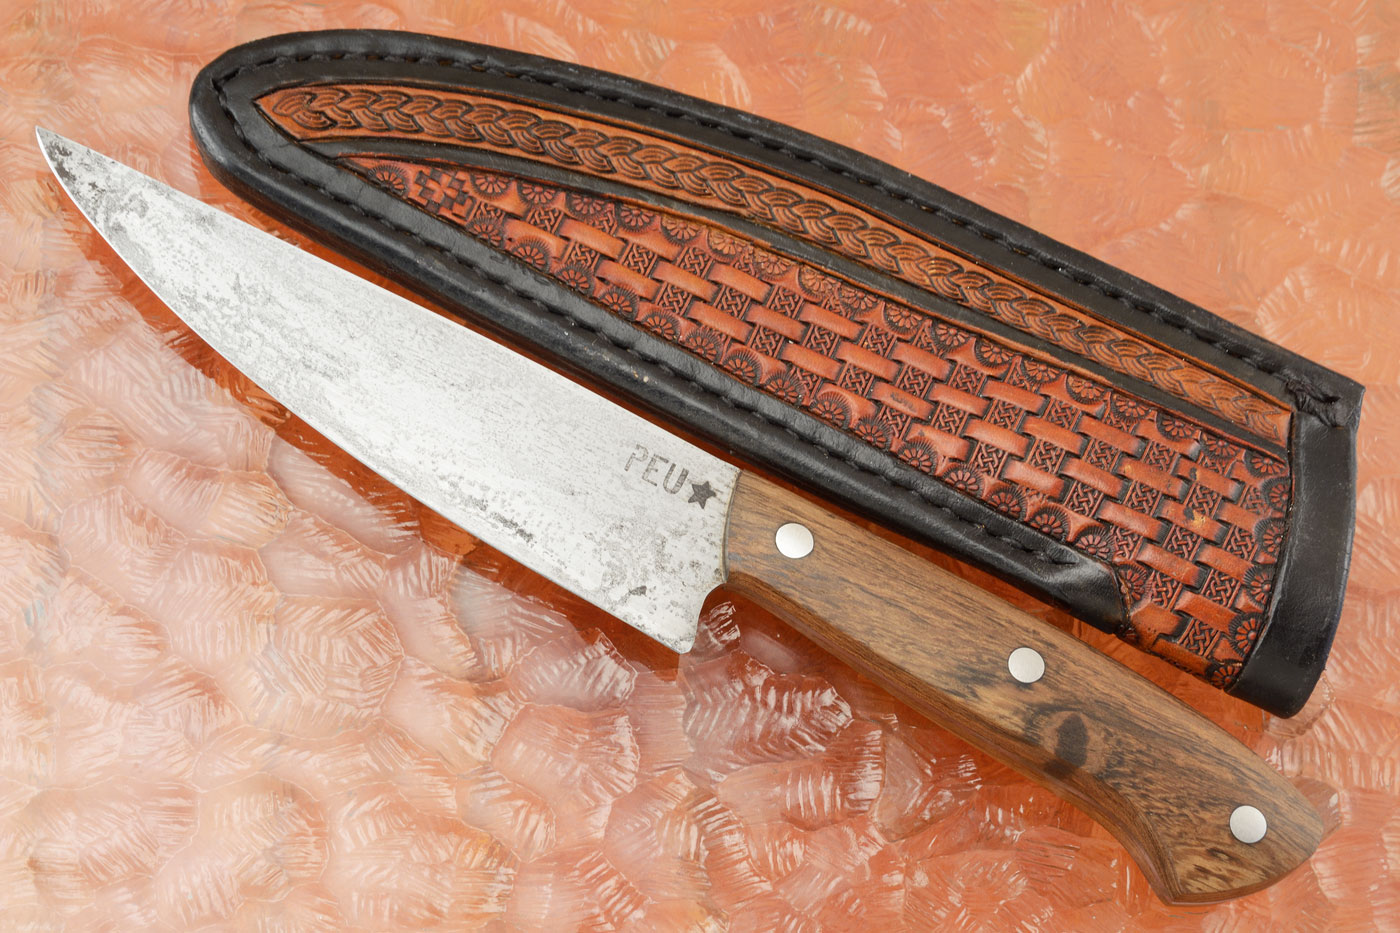 Chef's Utility Knife (Parrillero) with Lapacho and O2 Carbon Steel